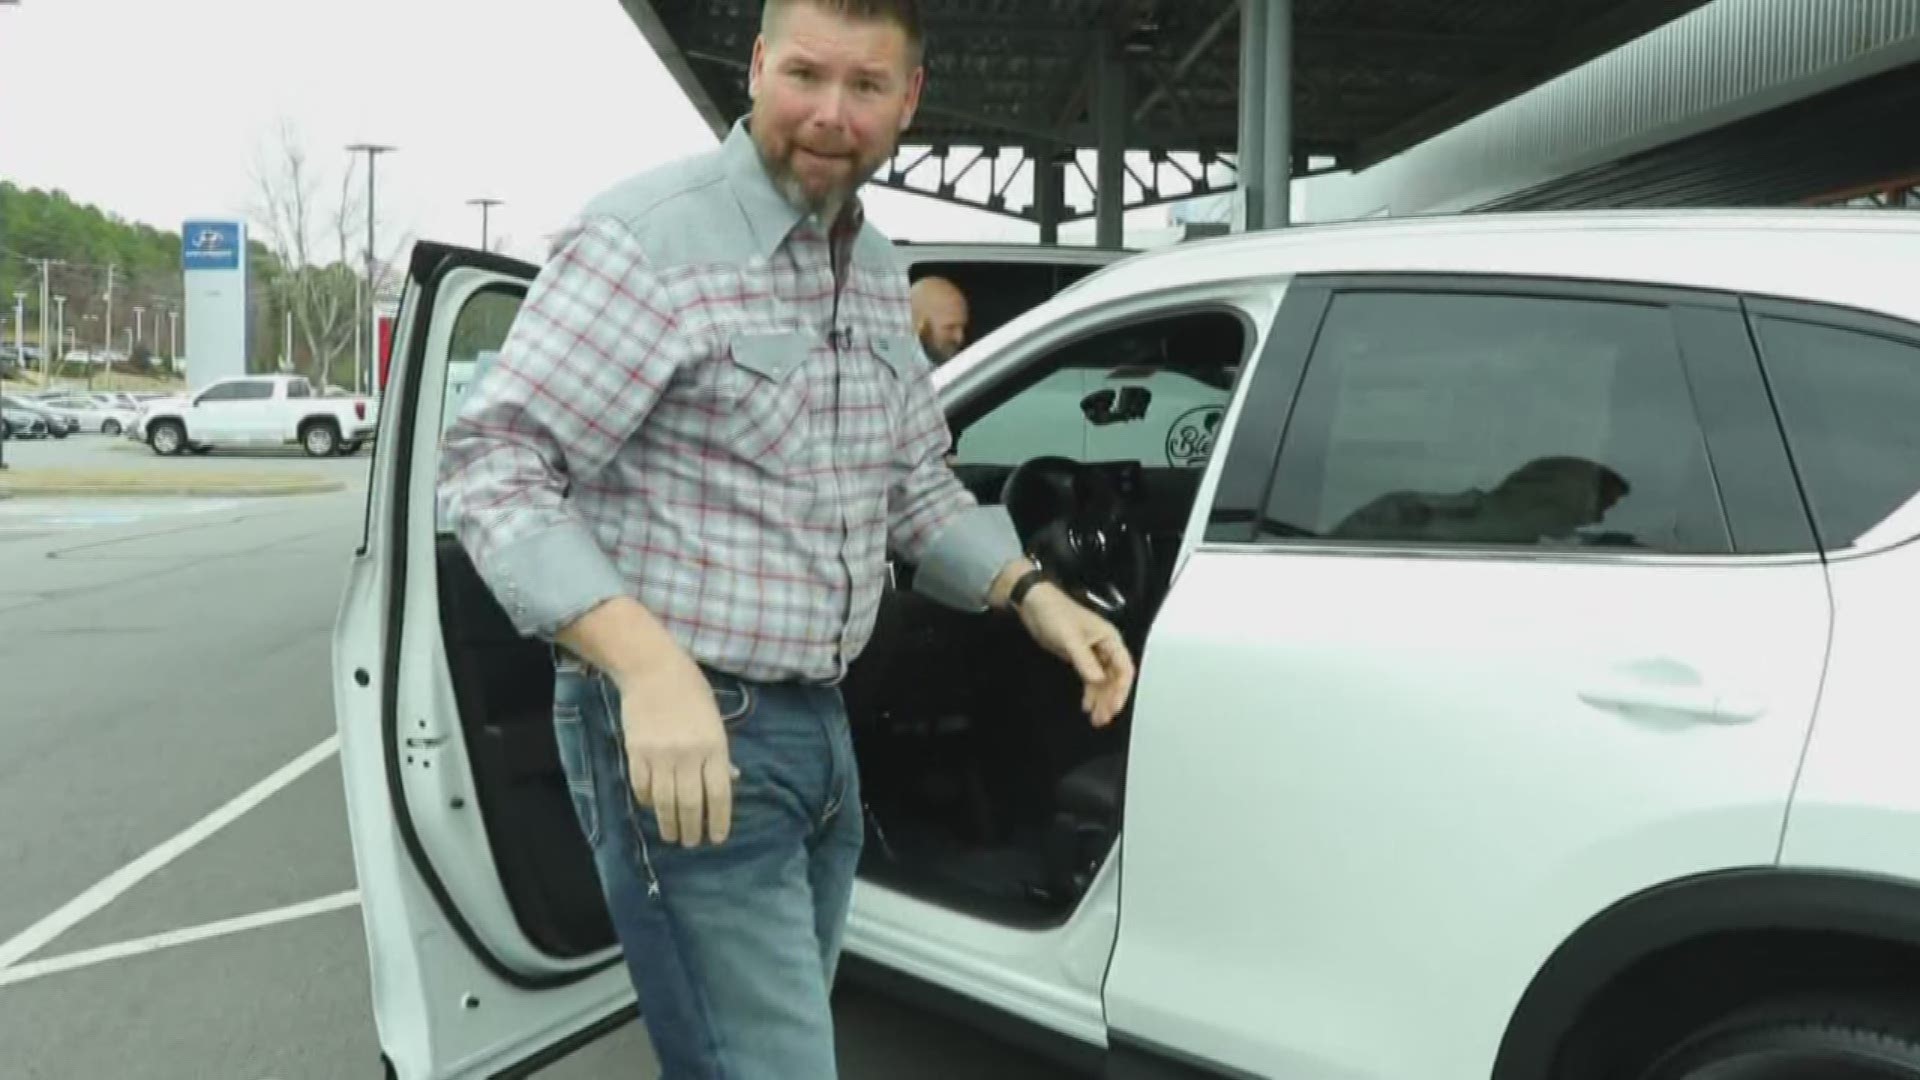 The Vine's Adam Bledsoe got to hit the road in the Mazda CX-5, which you can test drive yourself at Crain Mazda of Little Rock.